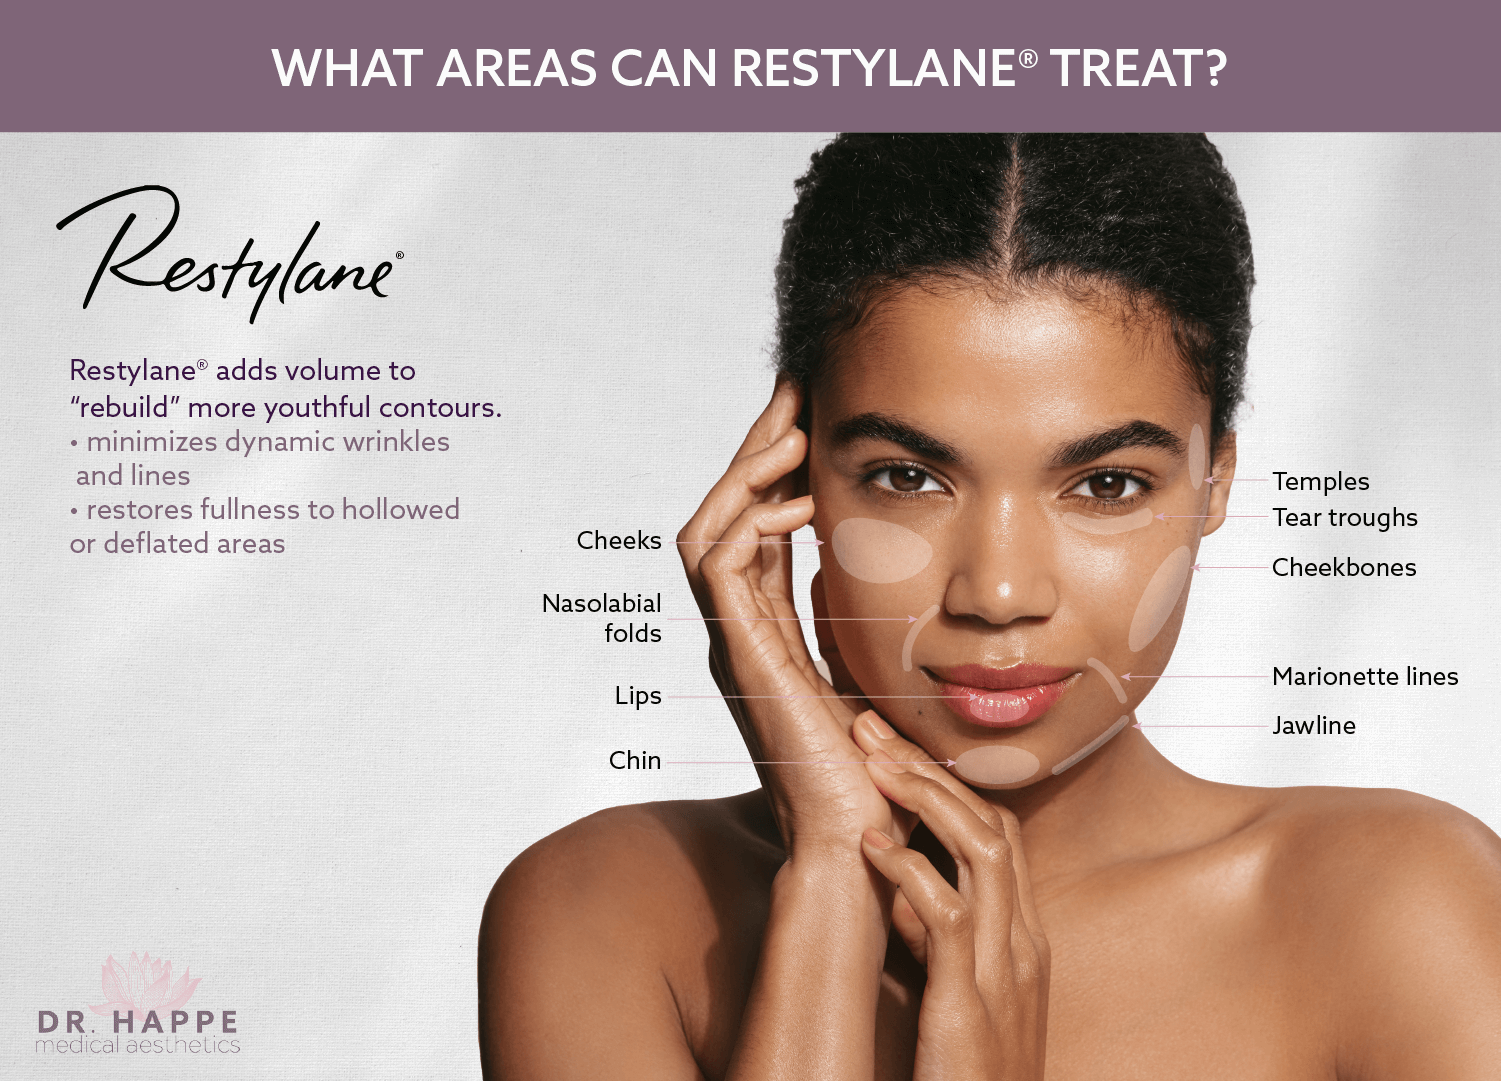 Discover the versatility of Restylane® at the Boston area’s Dr. Happe Medical Aesthetics.
